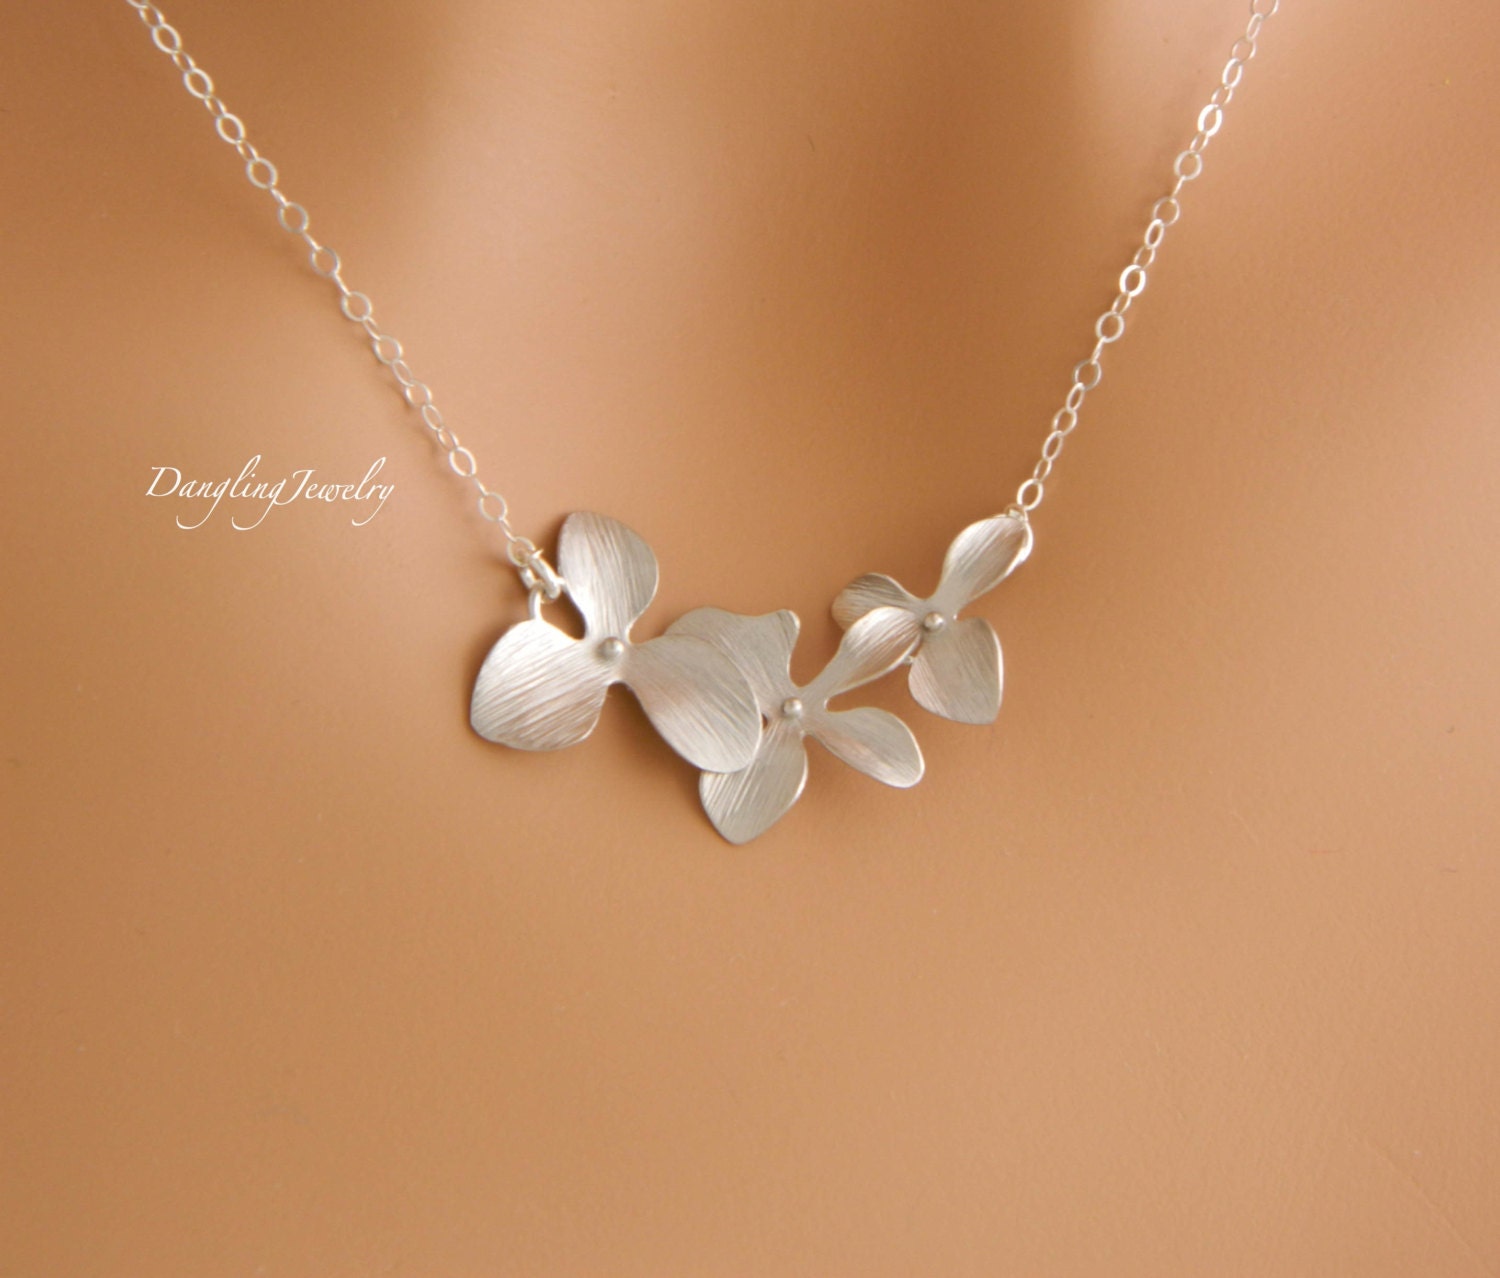 SILVER Orchid Necklace Bridesmaid Jewelry Wedding Jewelry